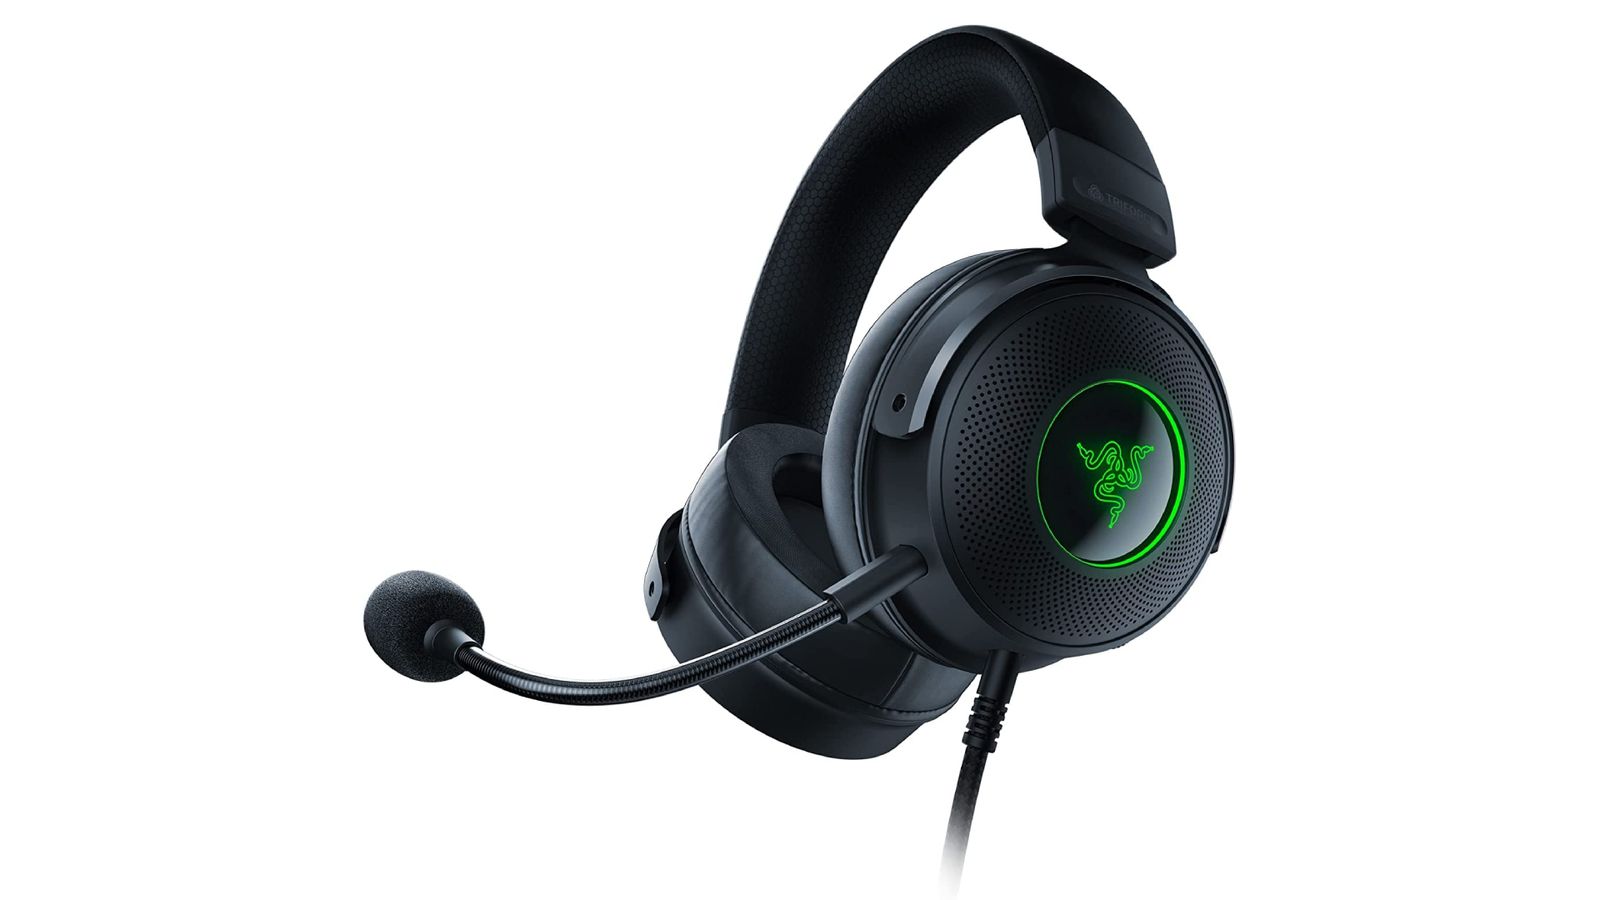 Razer Kraken V3 product image of a black headset with a mic featuring green Razer branding on the earcups.